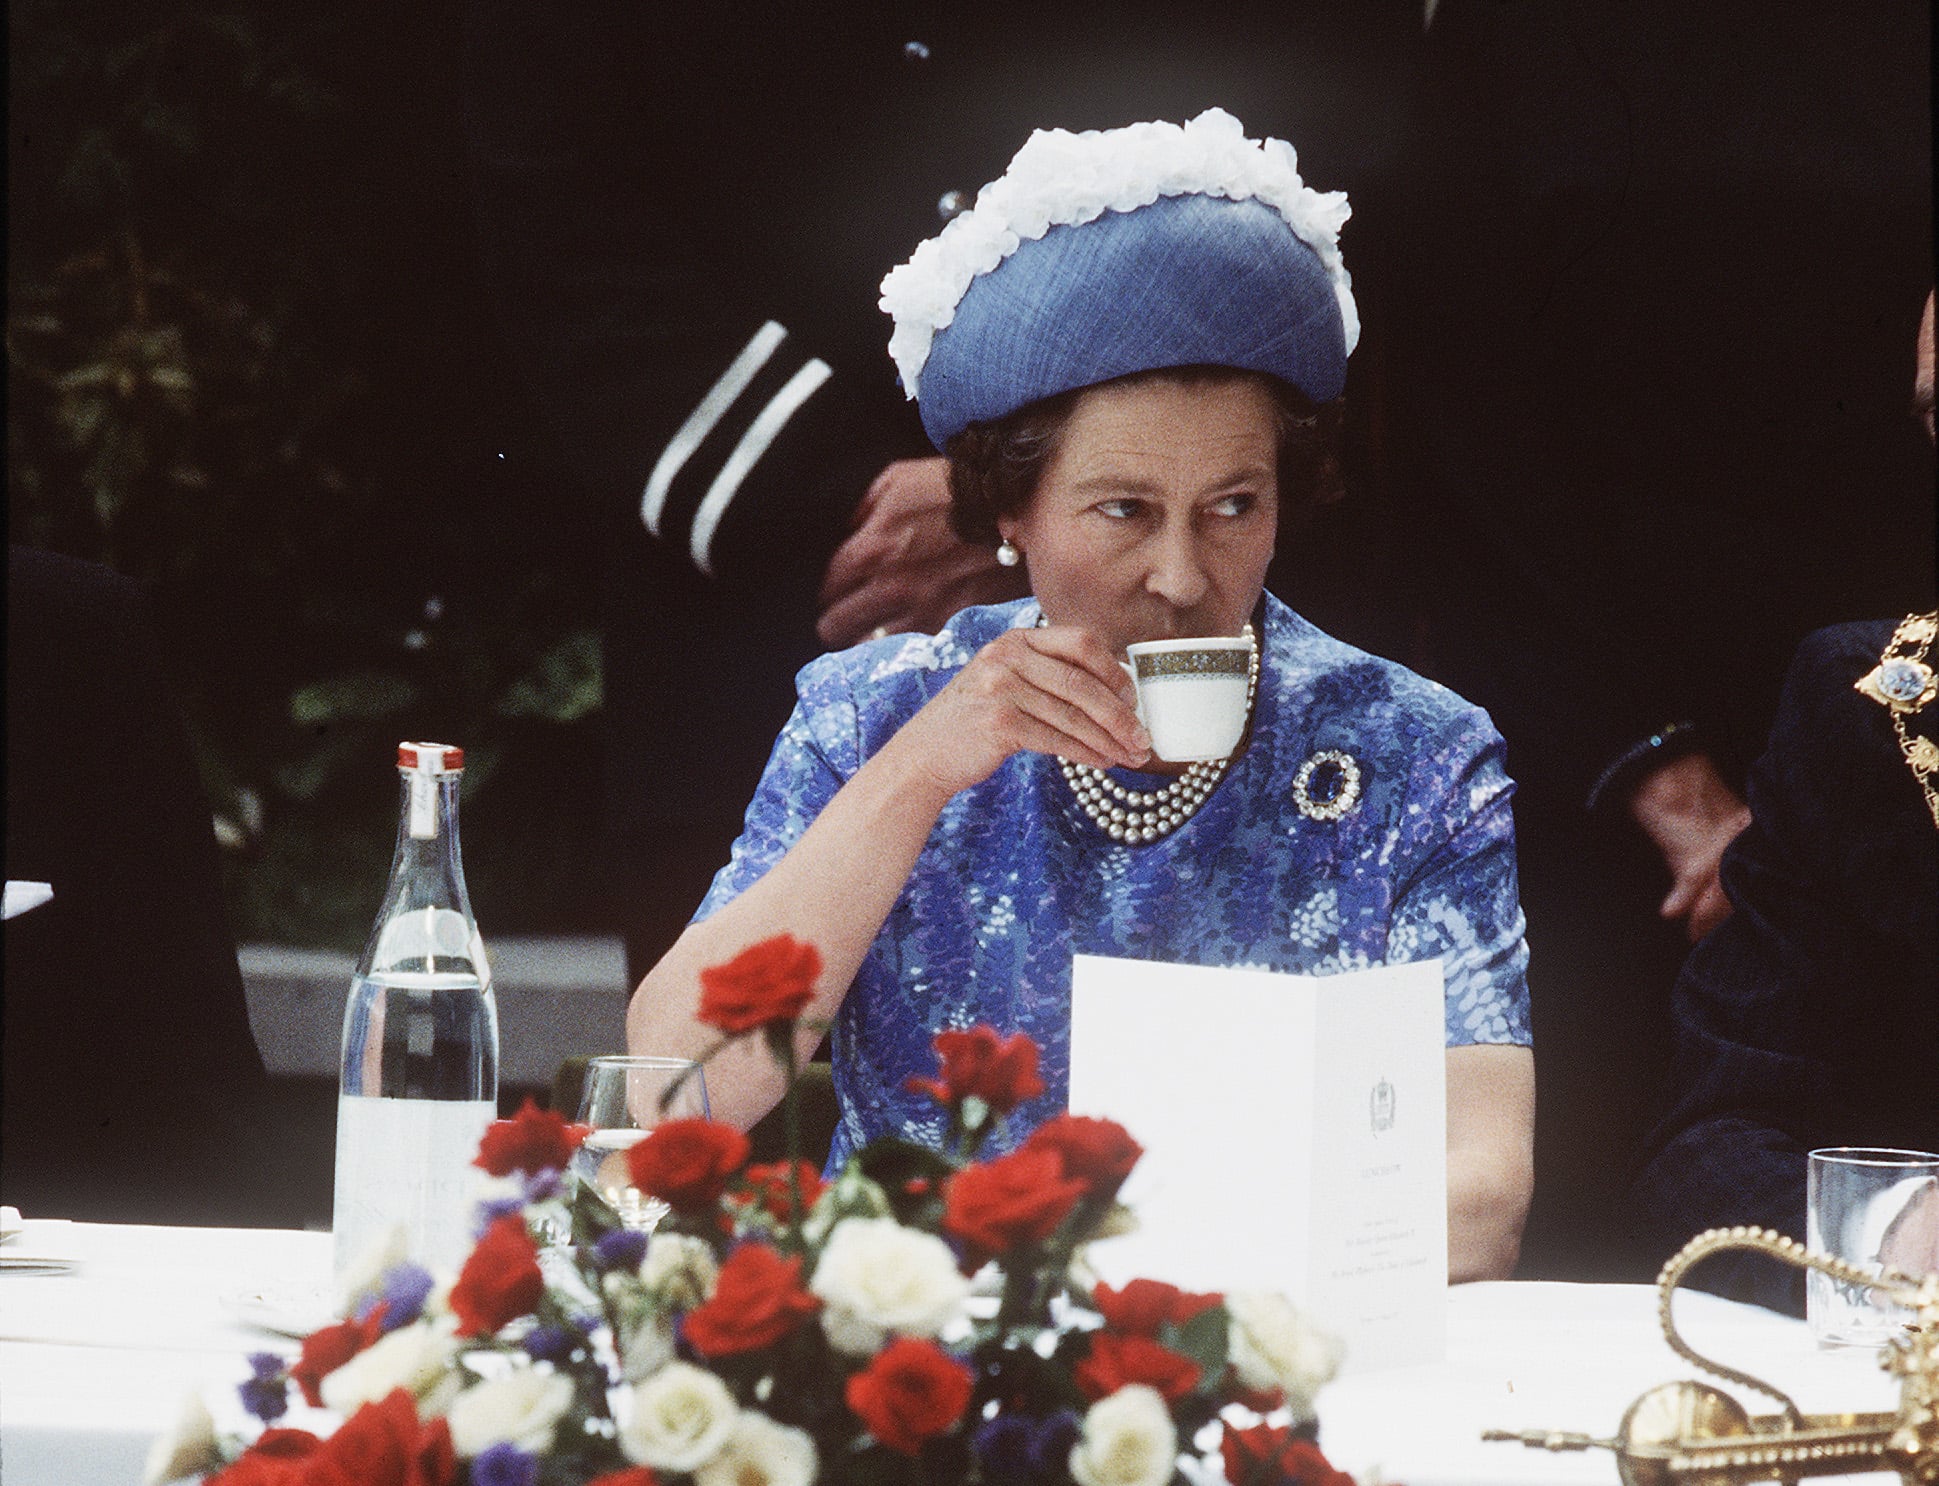 NORTHERN IRELAND - 1977: Queen Elizabeth ll has a cup of tea while in Northern Ireland on a royal visit in 1977.(Photo by Anwar Hussein/Getty Images)